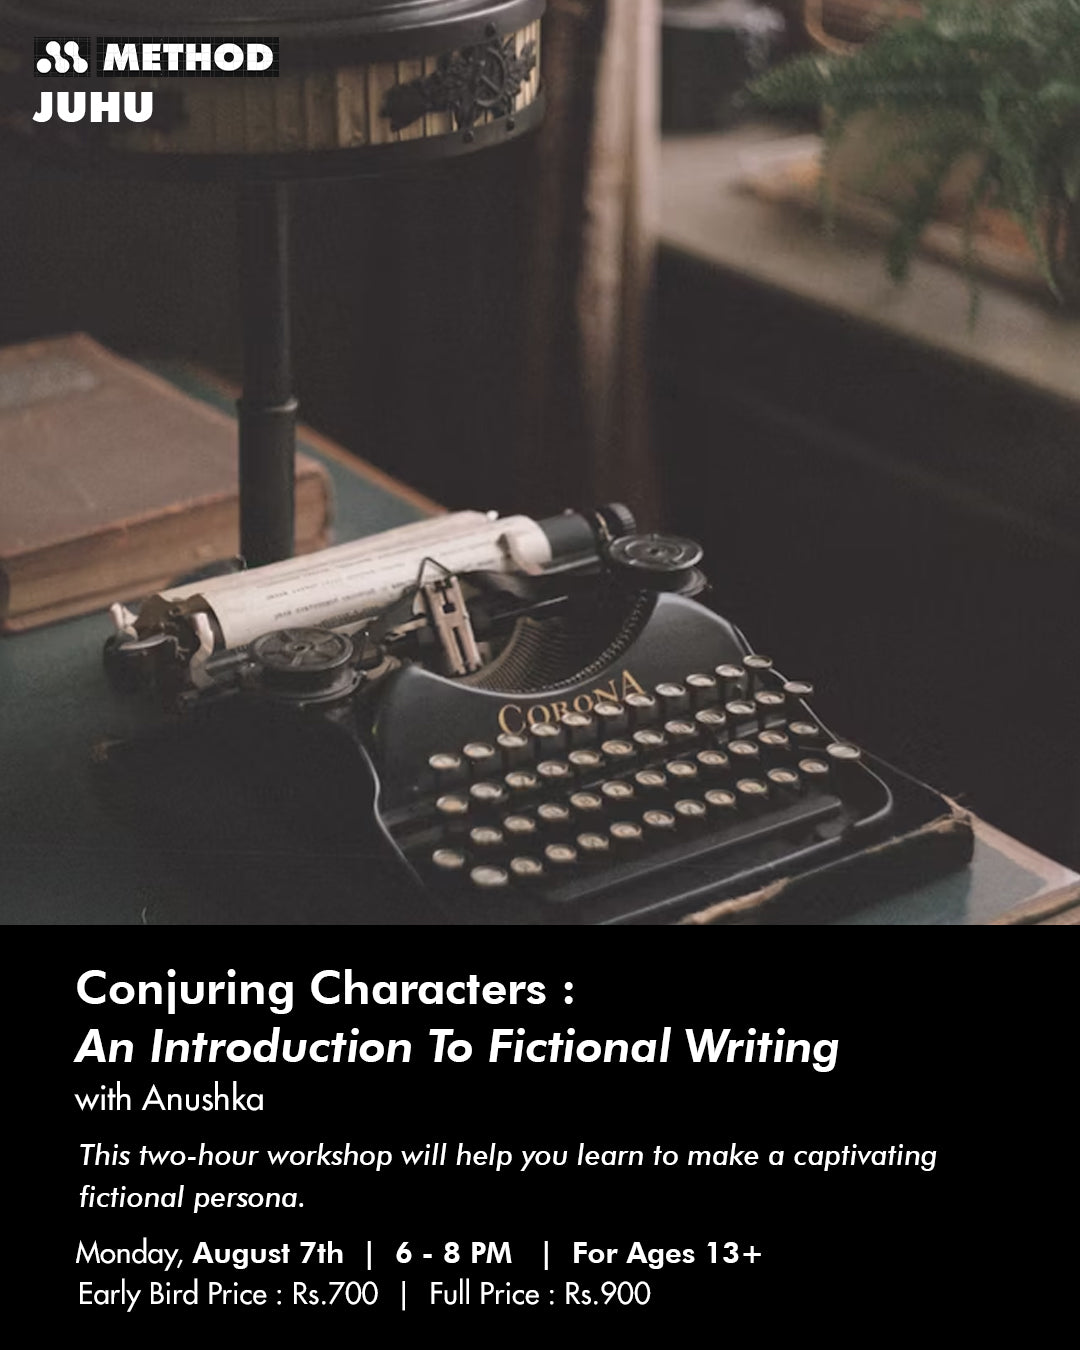 Conjuring Characters : An introduction to Fictional Writing with Anushka | Aug 7 | Workshop | Method Juhu